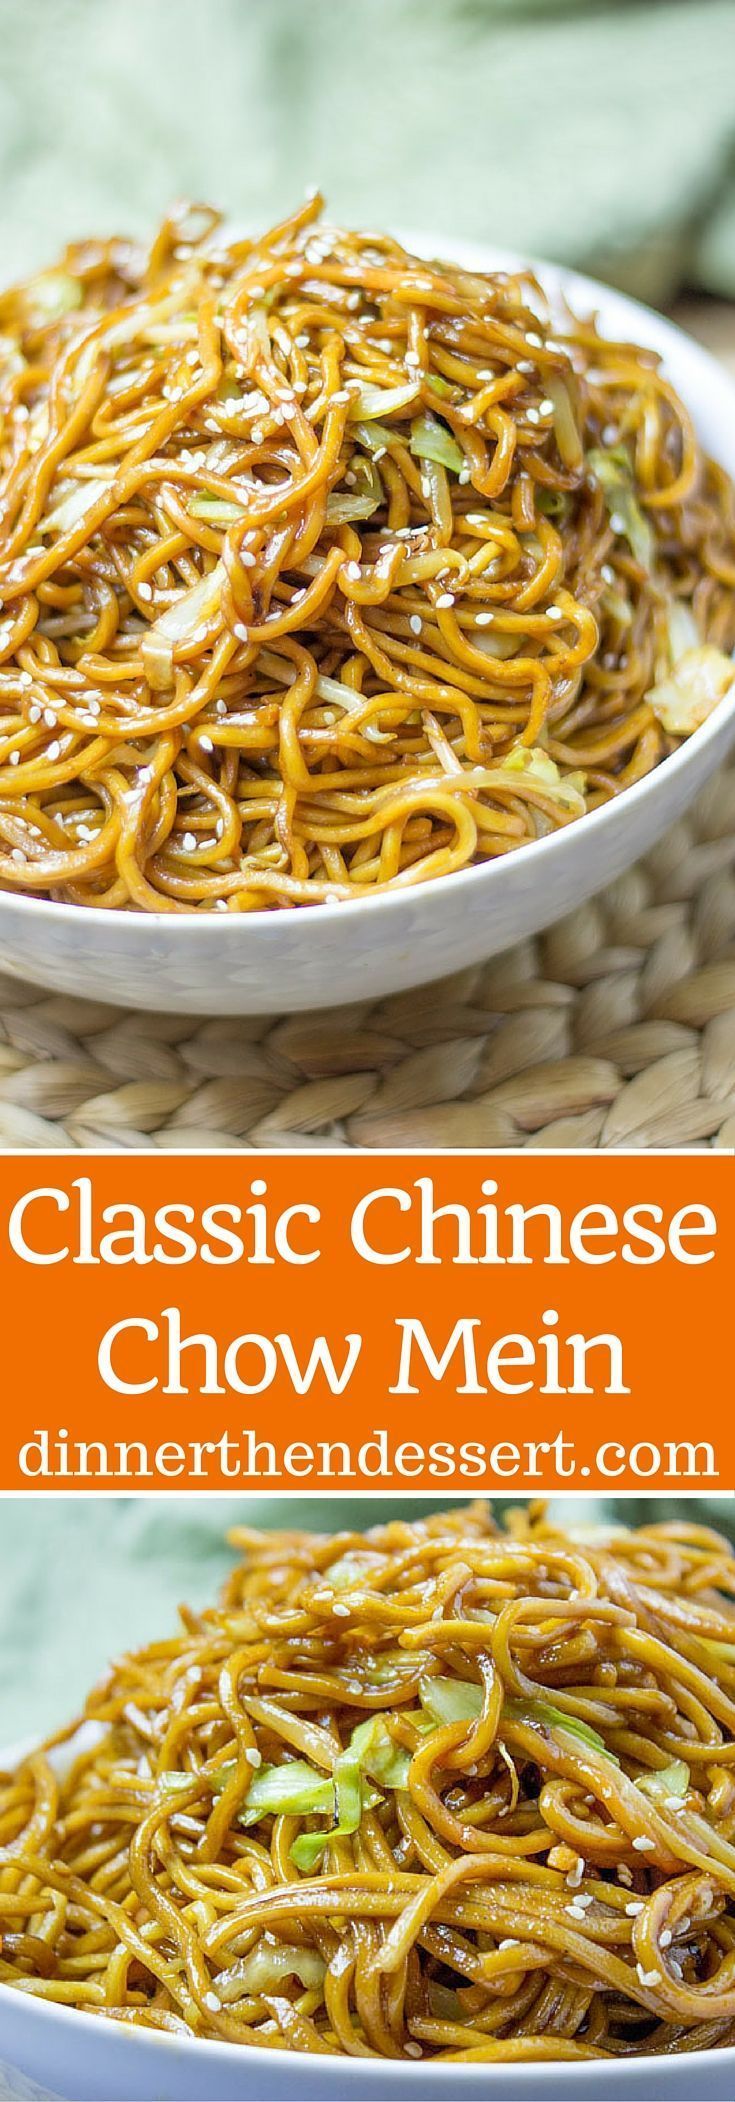 Classic Chinese Chow Mein with authentic ingredients and easy ingredient swaps to